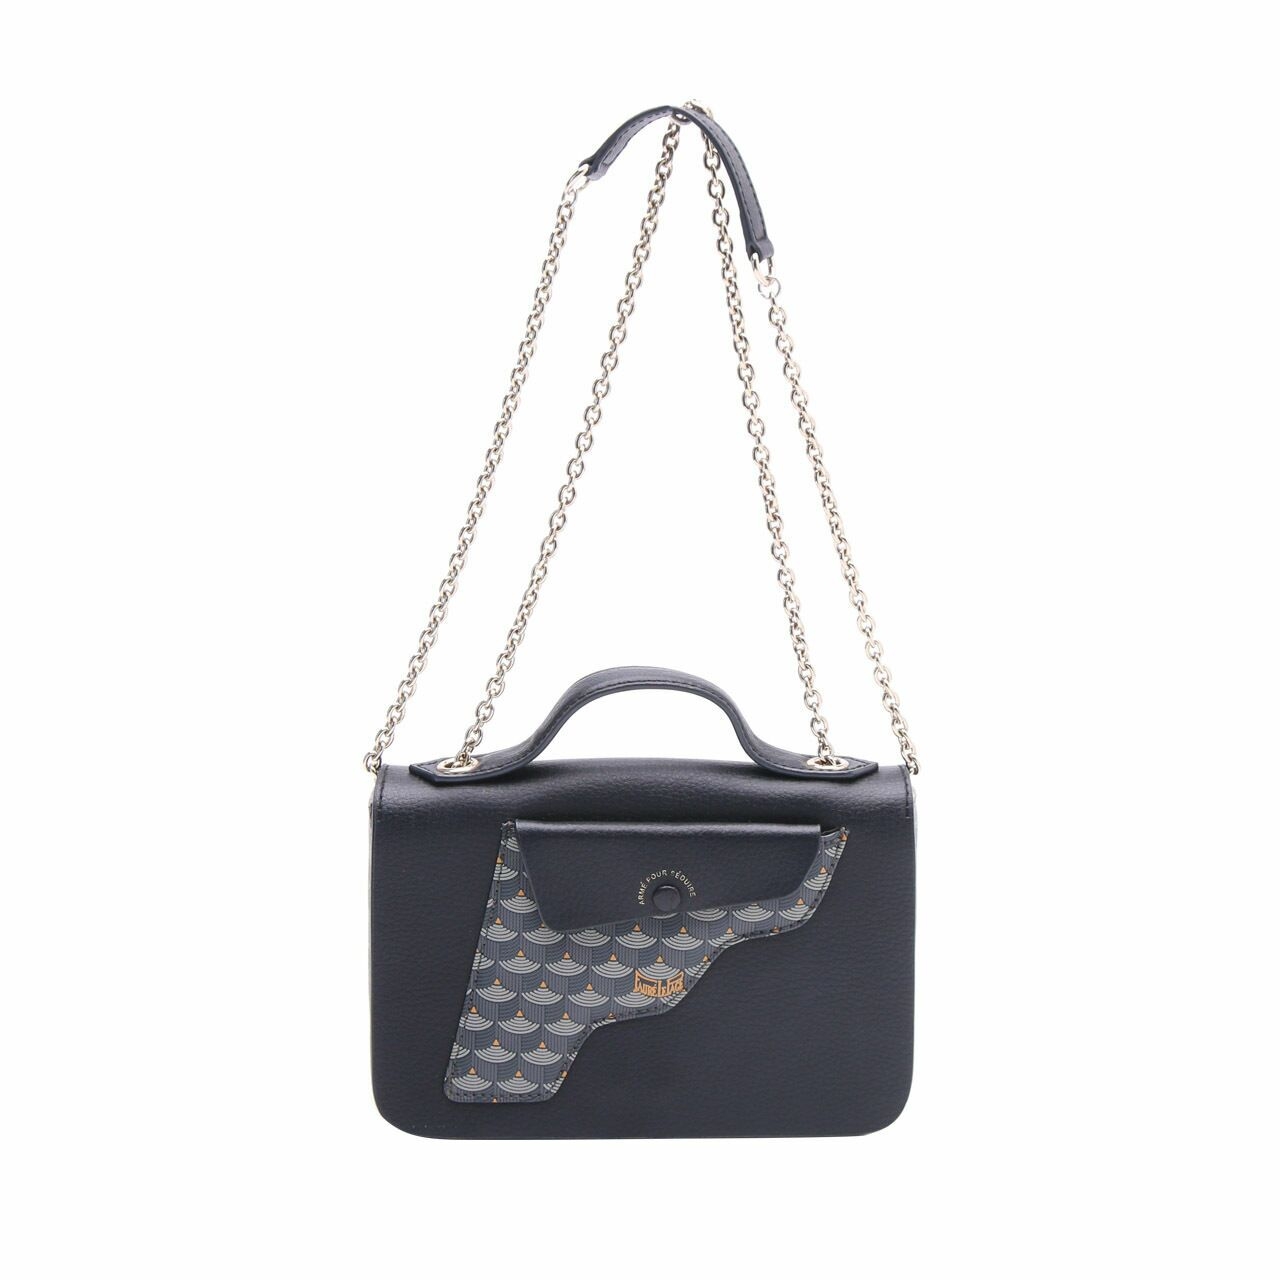 Faure Le Page Navy Leather Sling Bag